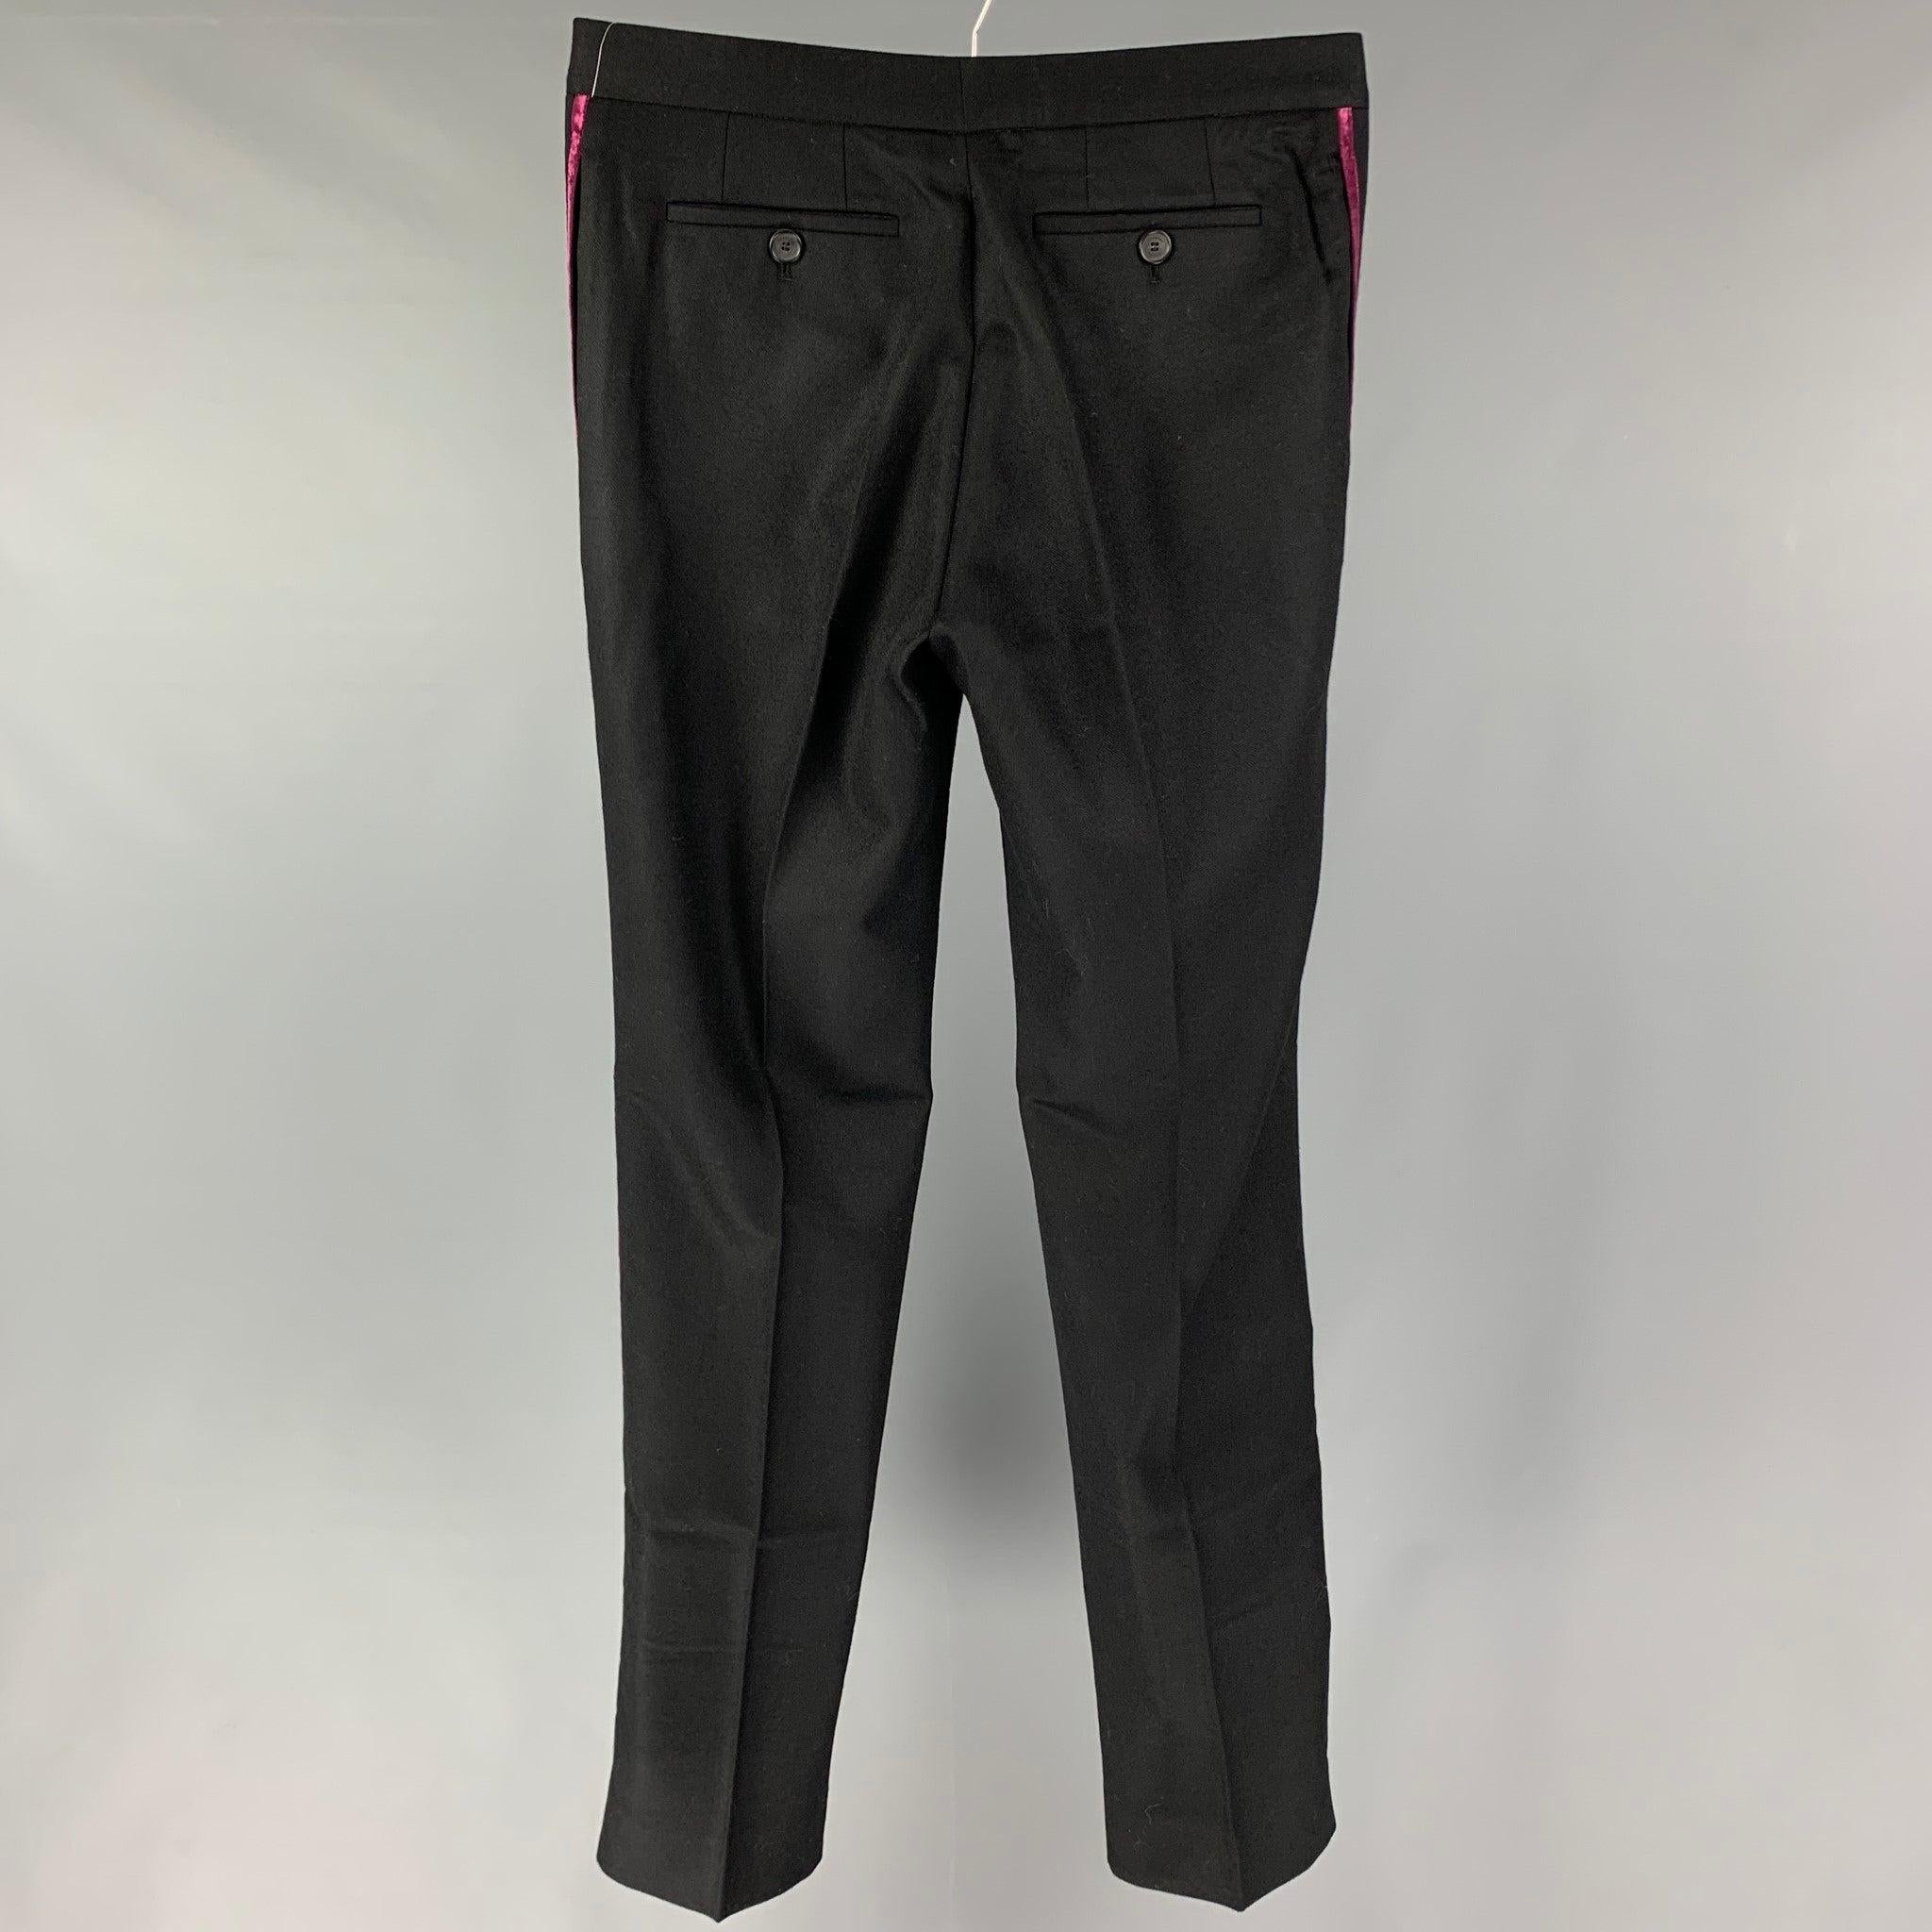 BURBERRY PRORSUM Size 32 Black Wool Tuxedo Dress Pants In Good Condition For Sale In San Francisco, CA